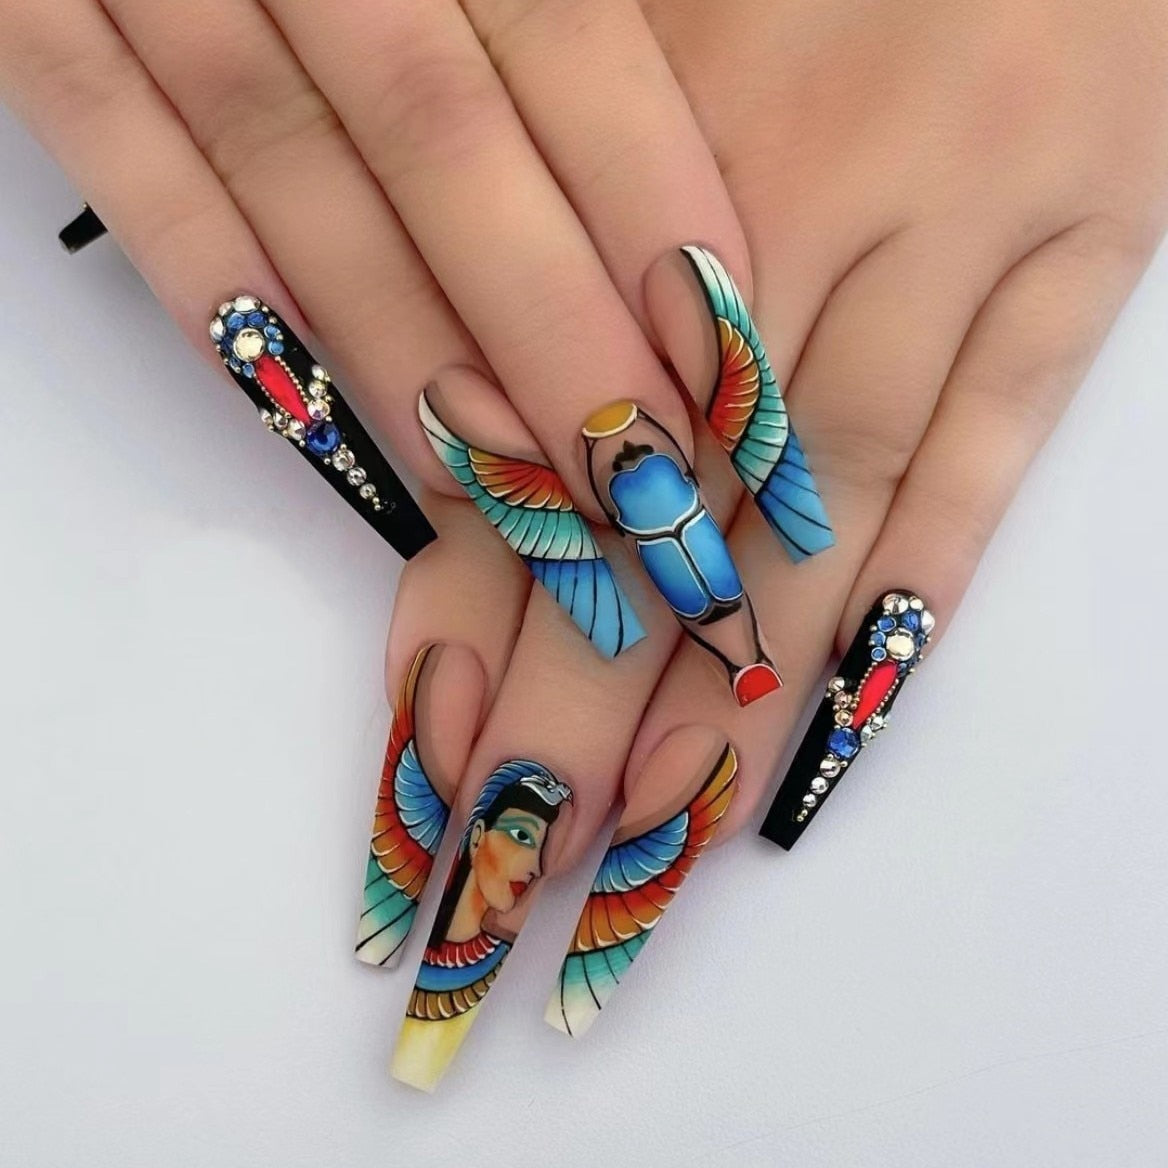 3D Fake Nails Peacock Girl Designs French Long Coffin Tips Tryk på Faux Ongles Tips DIY Manicure Levering Falske akrylnegle